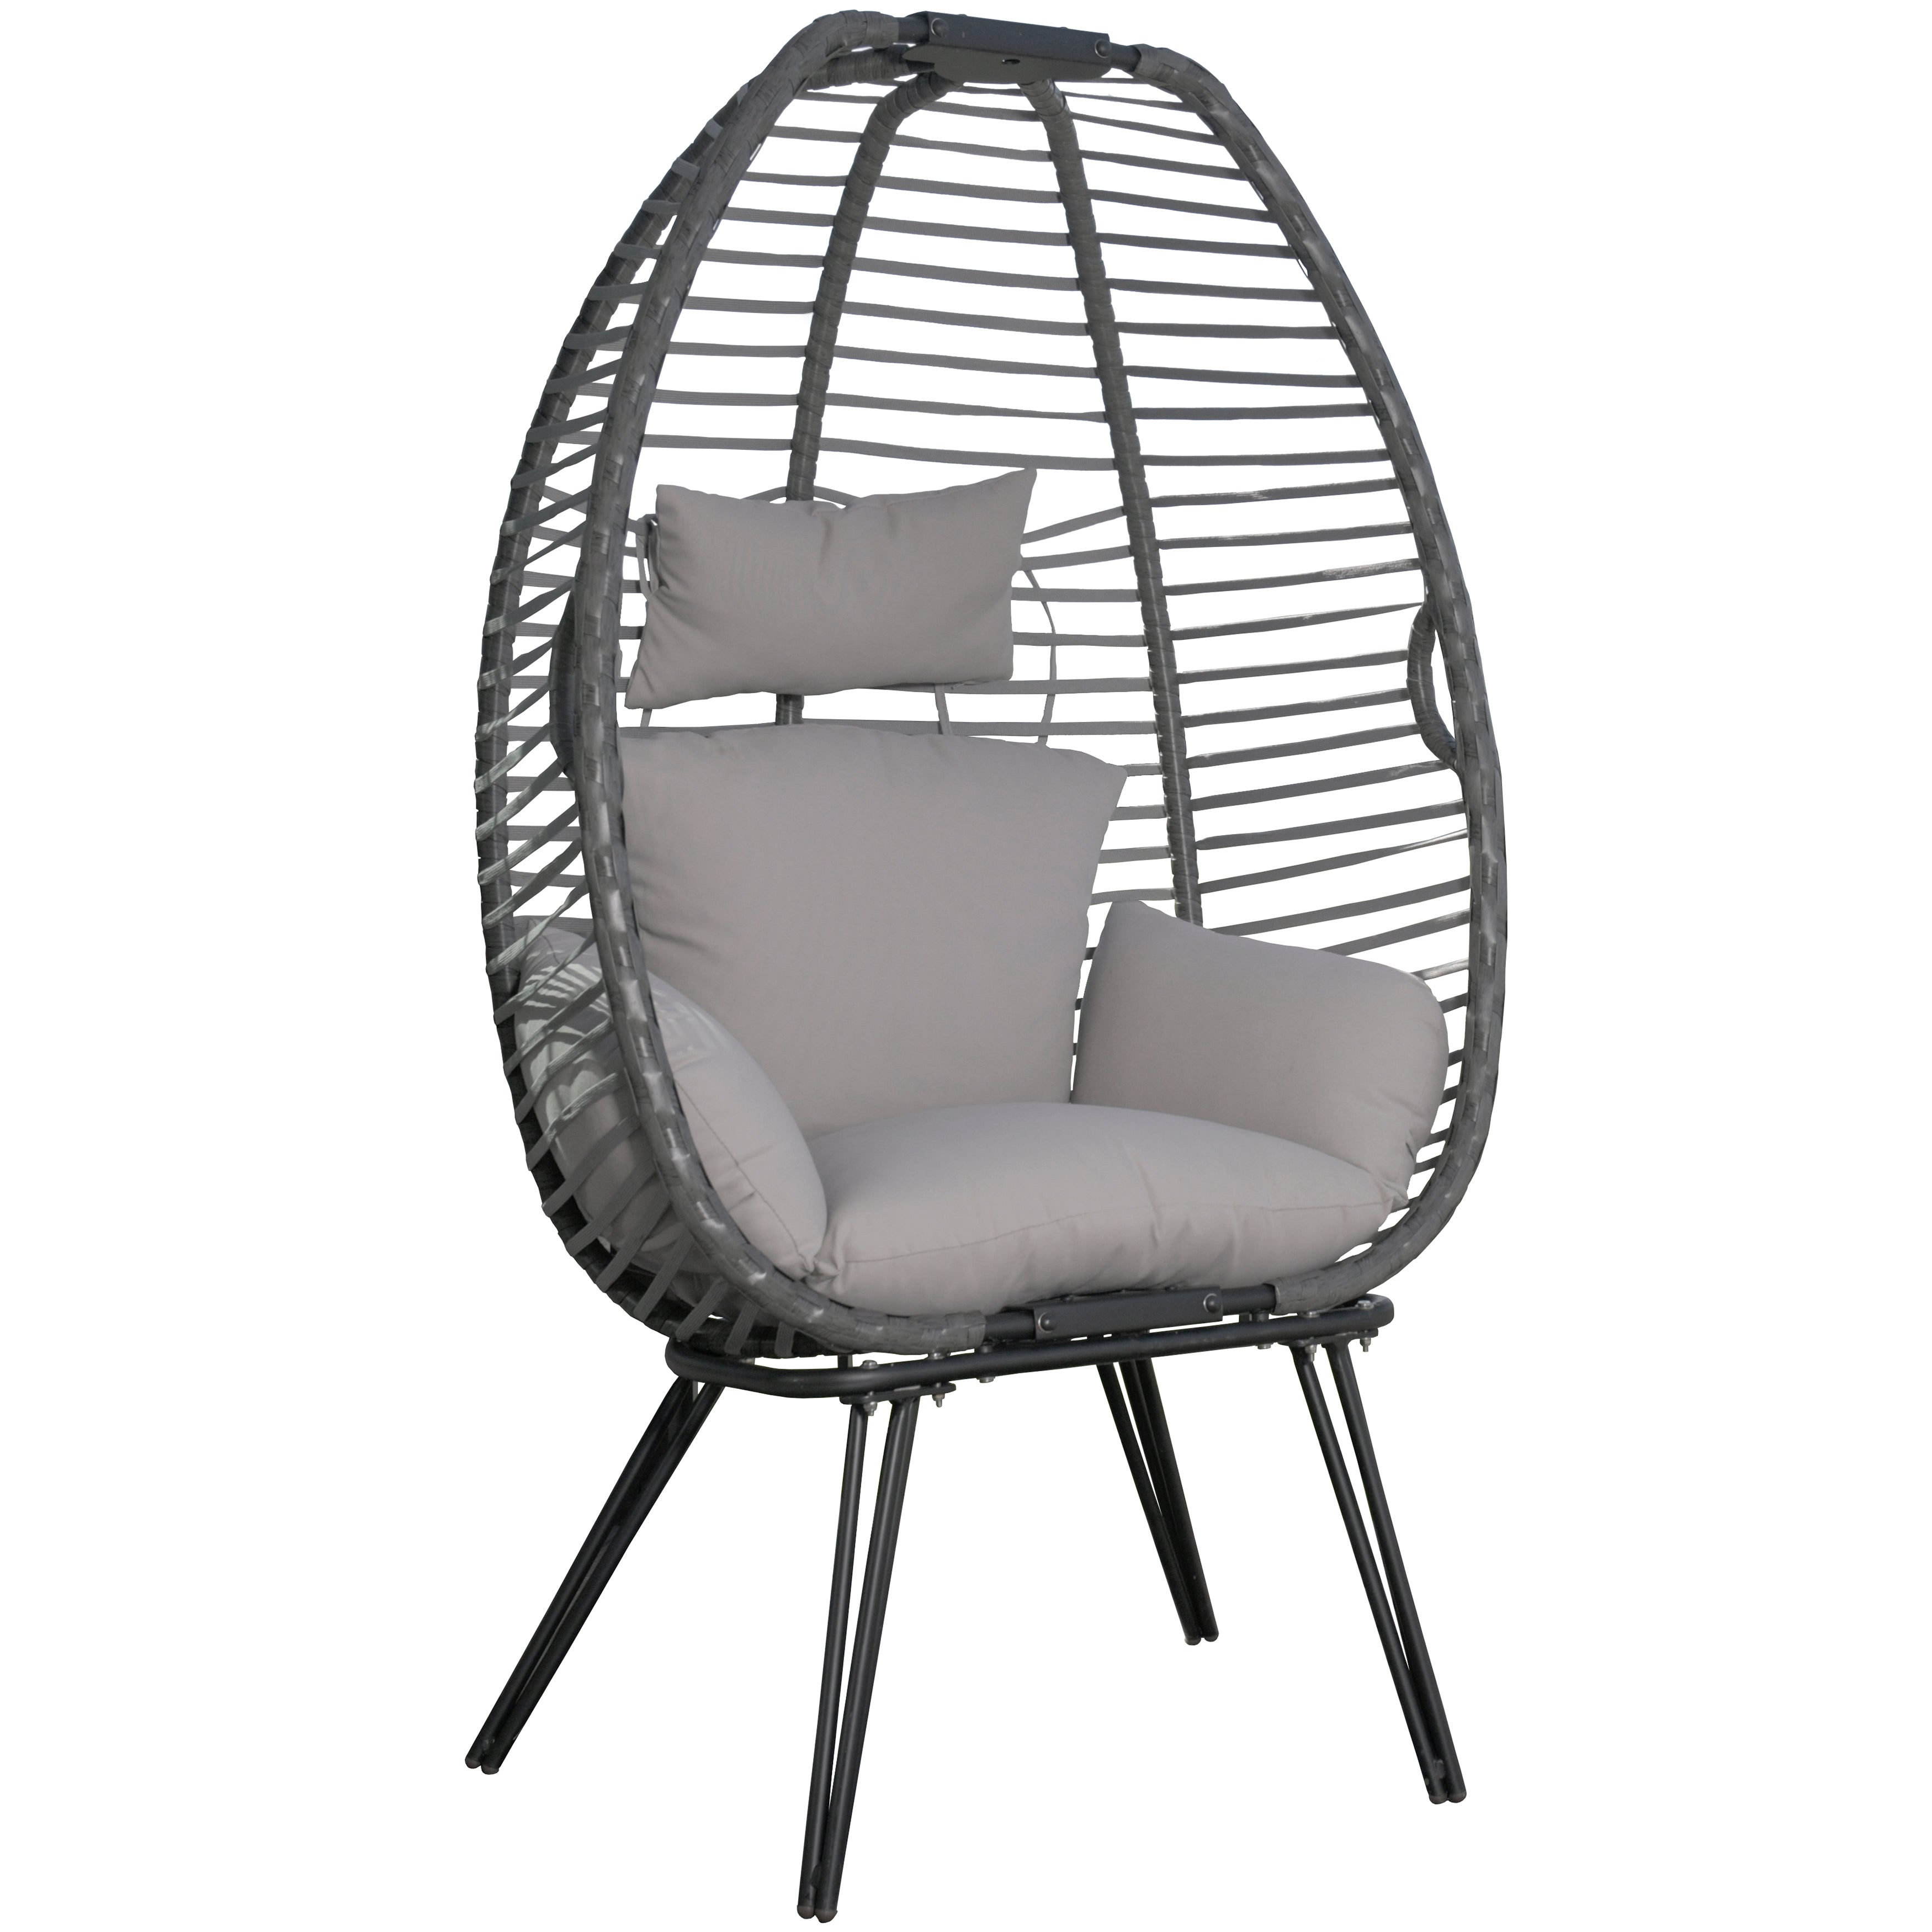 Nest Chair with Legs - Moonstone